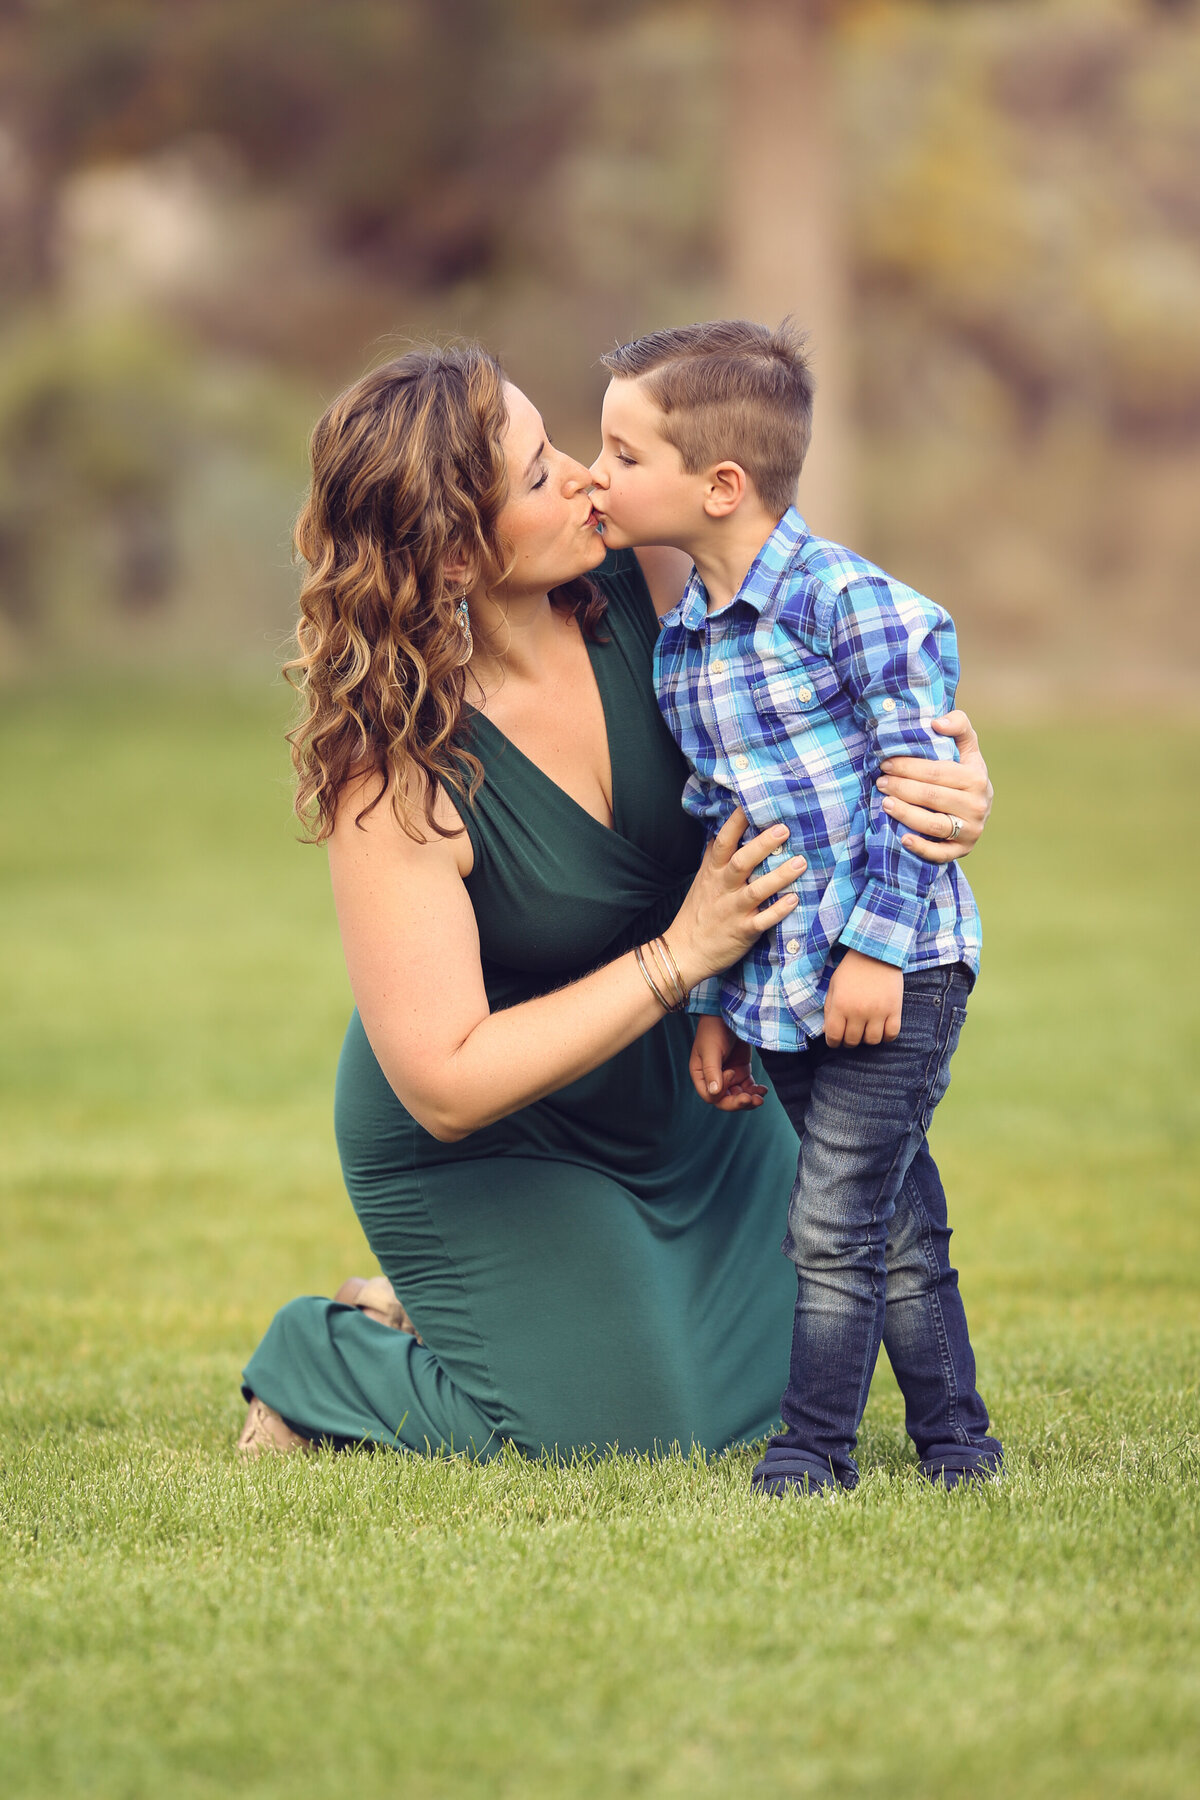 Yvonne-Min-Family-downtown-Photos-outside-natural-light-park-trees-sunset-photography-denver-thornton-broomfield-green-dress-mom-kiss-portraits-session-westminster-north-colorado-hug-boy-son-commons-setting-grass-connection-love-arvada-boulder-6